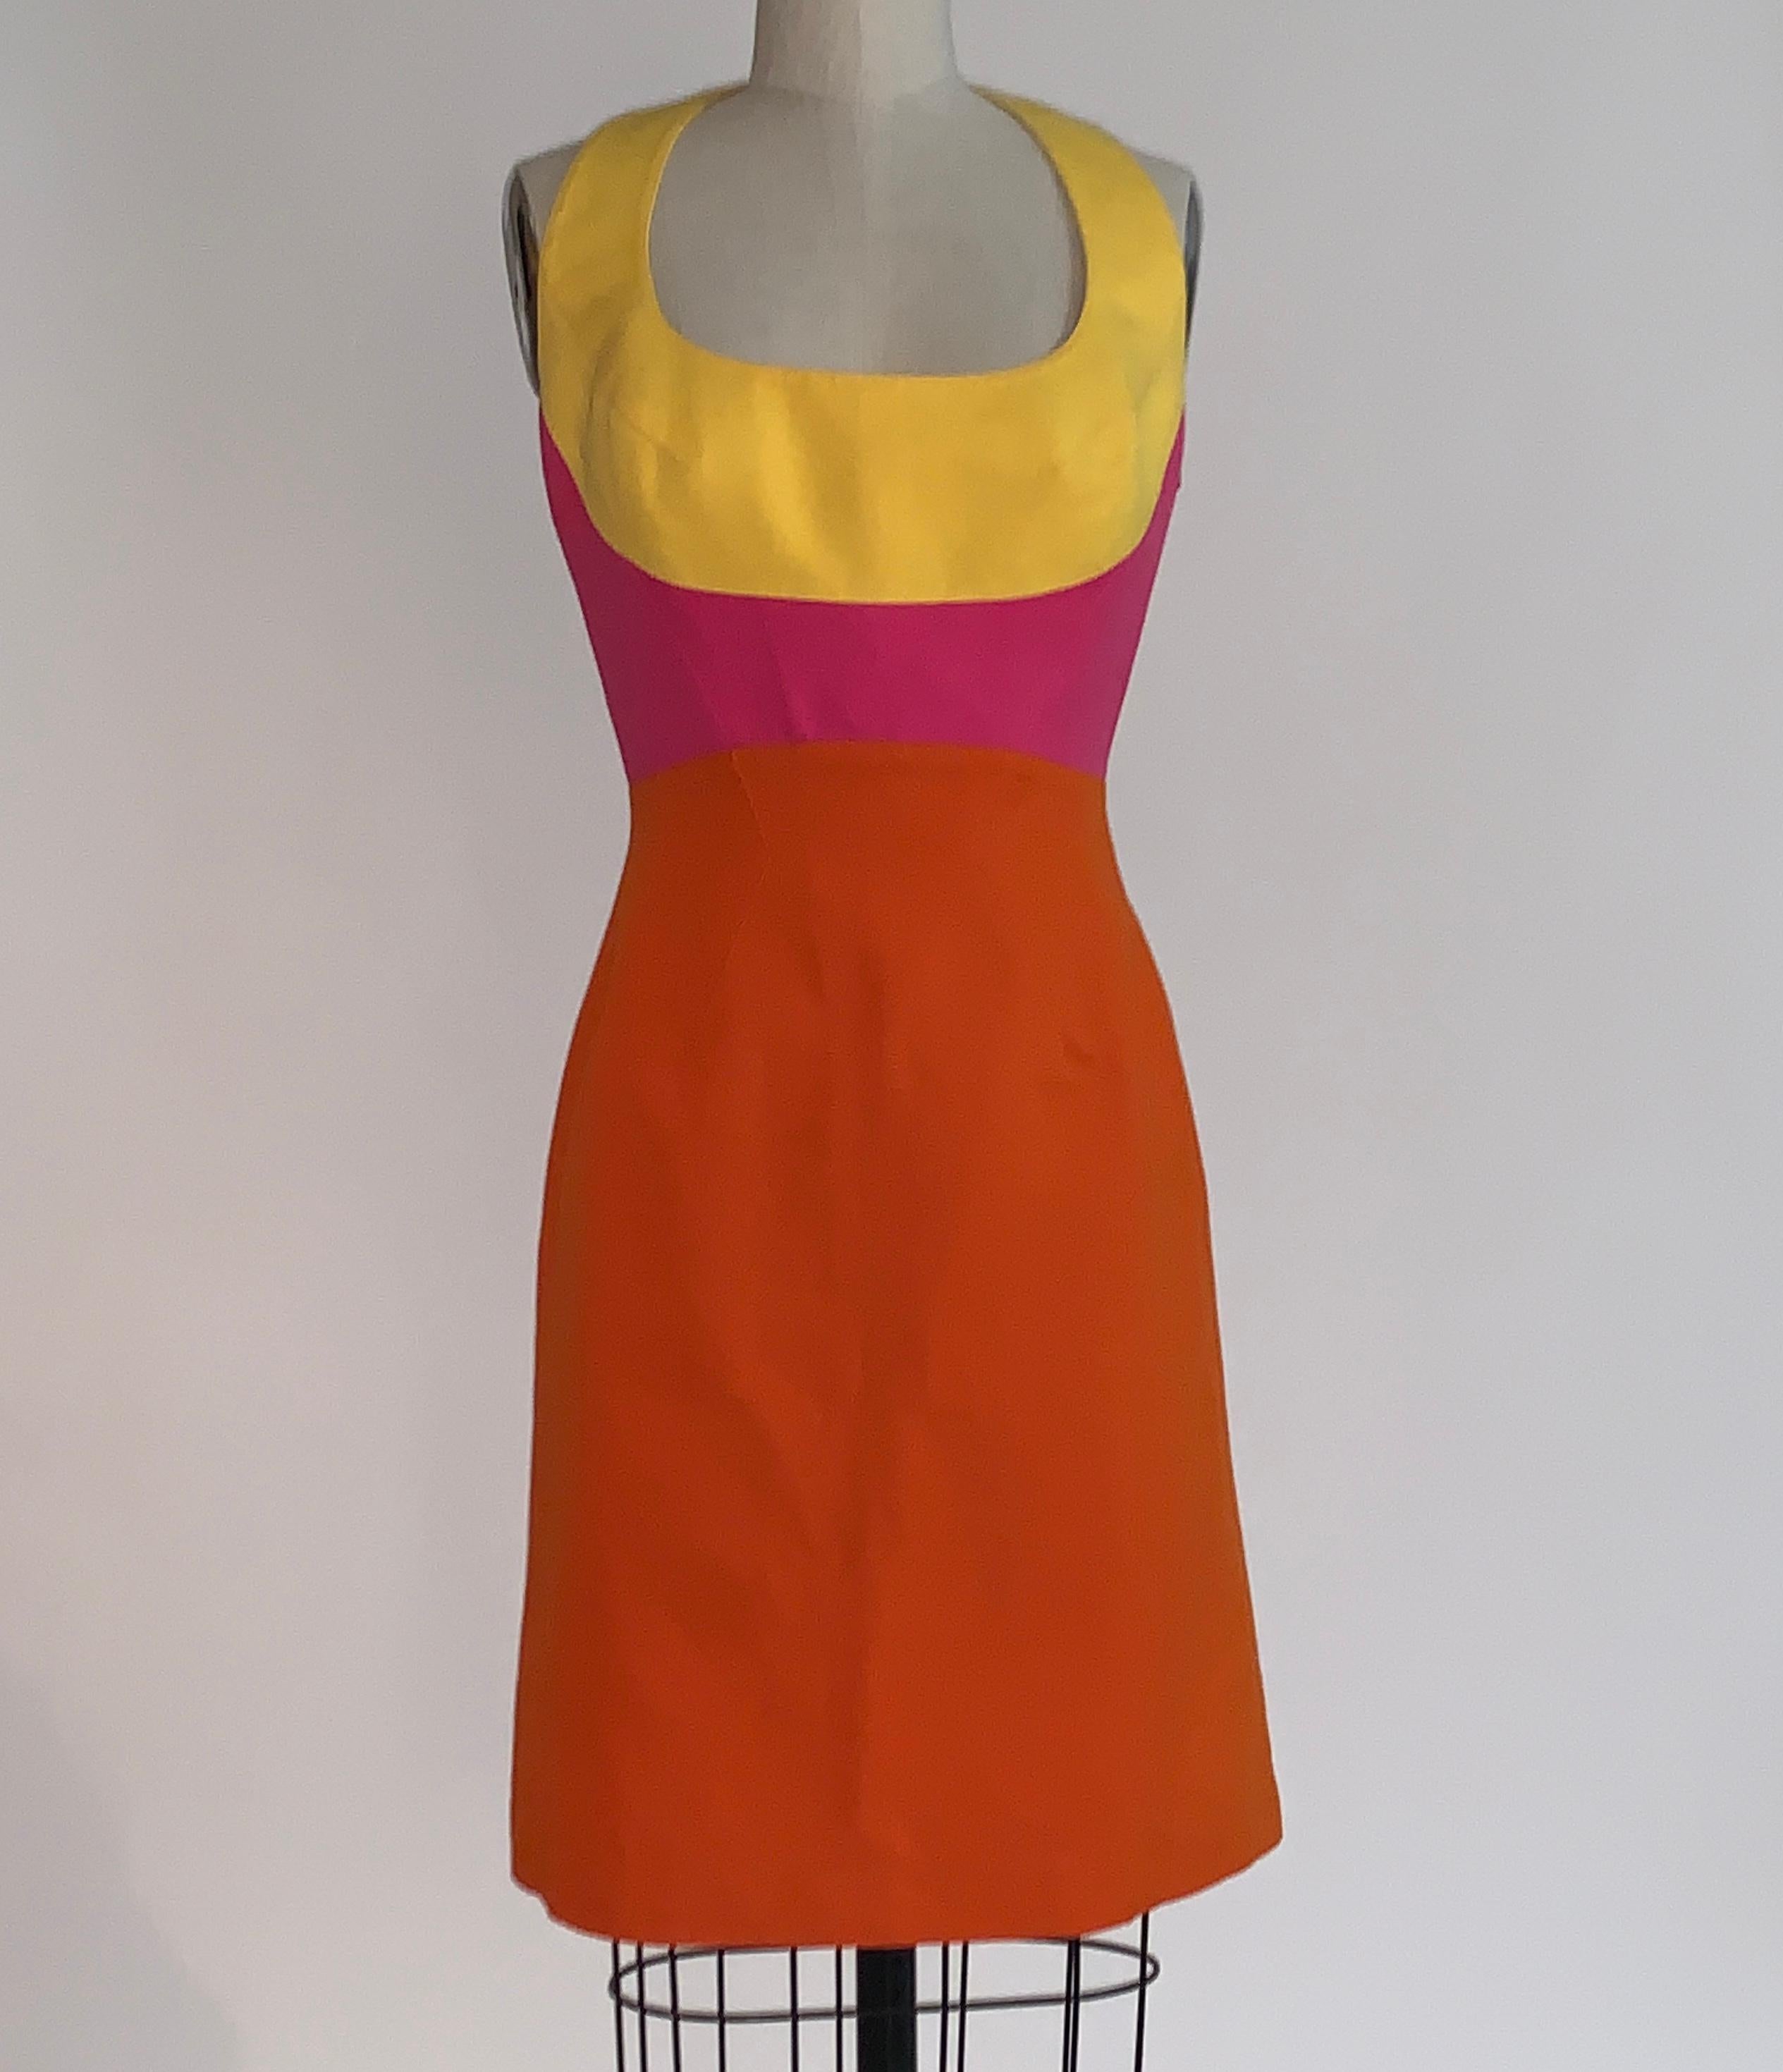 Thierry Mugler vintage 1990s color block pink, yellow, and orange dress with strap detailing at back from designer's Mugler line. Side zip, snap at back neck. 

60% cotton, 40% linen.
Fully lined in 100% acetate. 

Made in France.

Size FR 38,